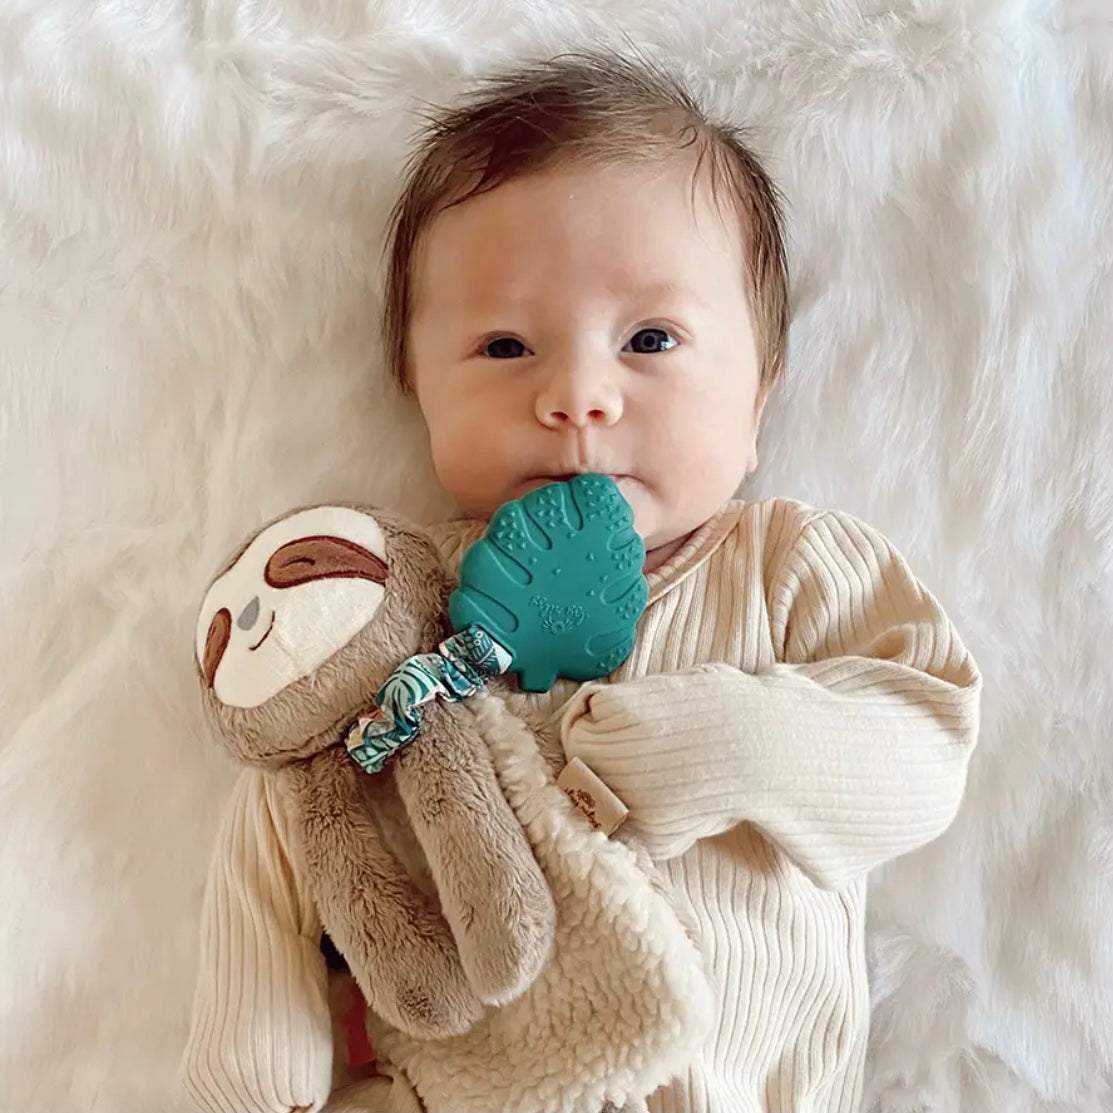 Itzy Lovey Plush Teether Toy